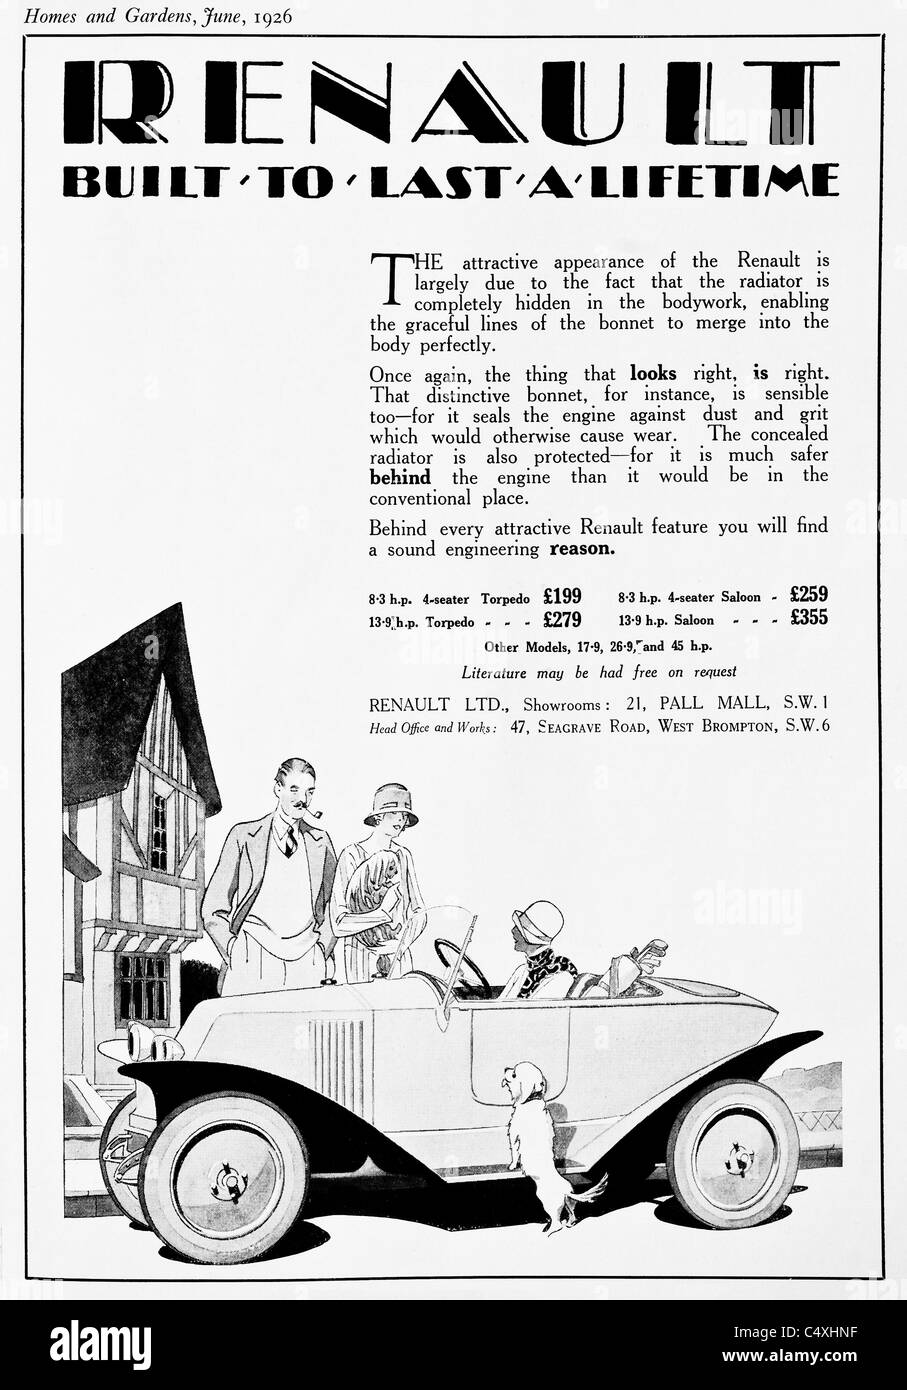 1926 'Renault' Car Advertisement from 'Homes and Gardens' magazine. Stock Photo